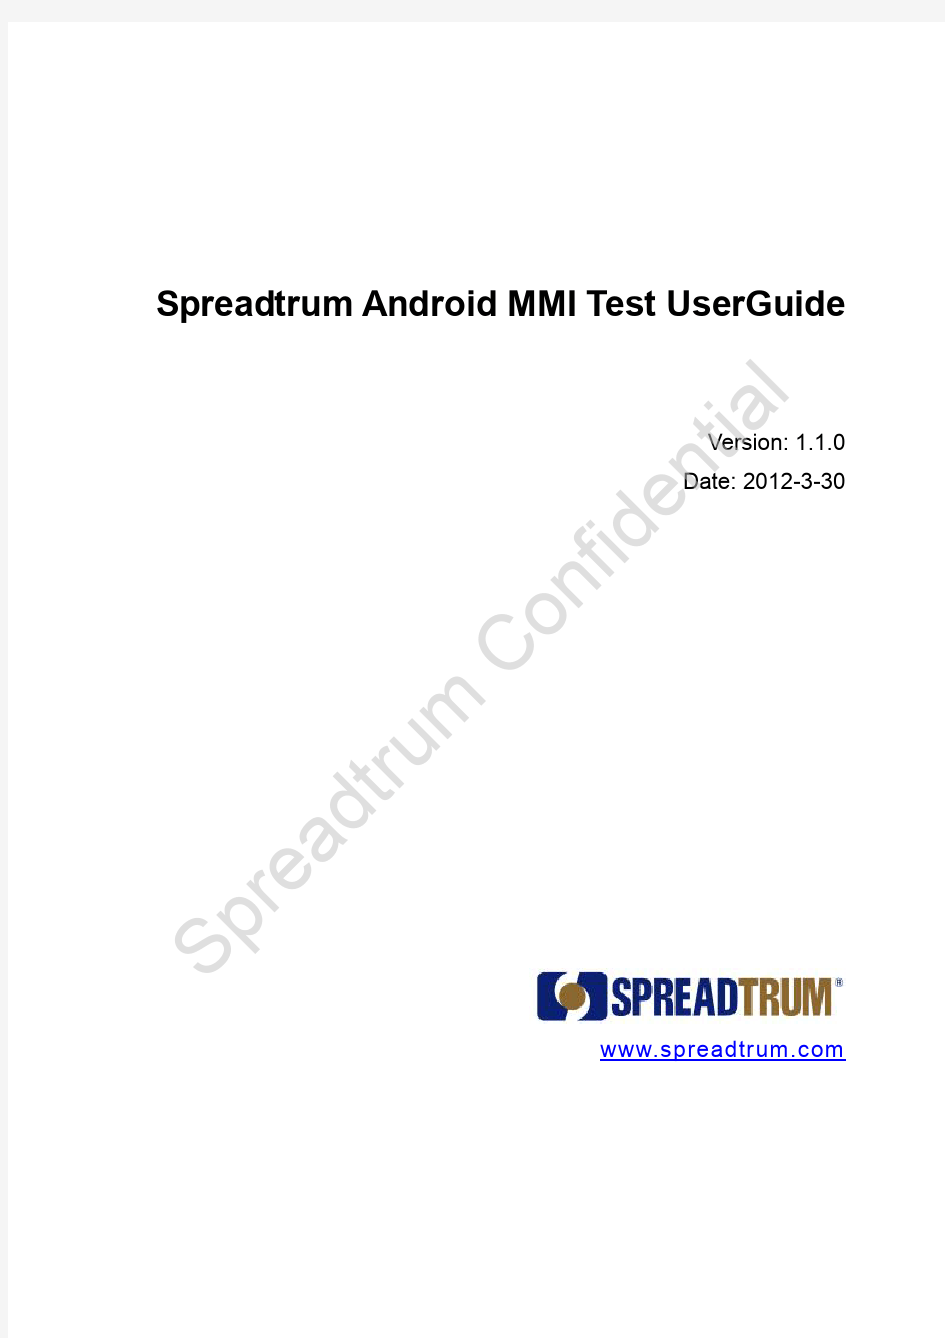 Spreadtrum_Android_MMITest_UserGuide_工程指令